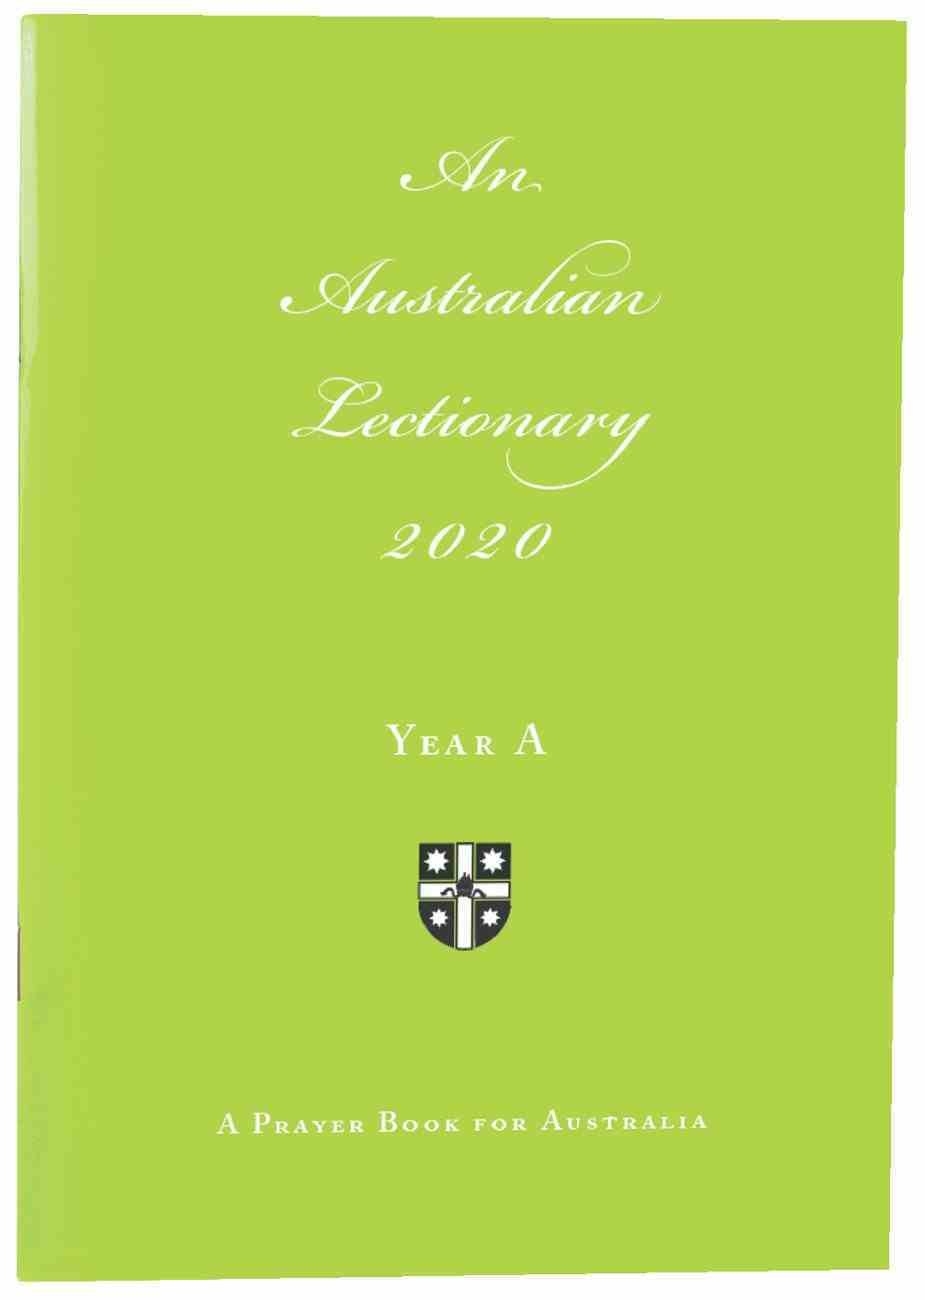 2020 Australian Lectionary 2020 Anglican Prayer Book For Australia (Year A)  Show Lectionary For 2020